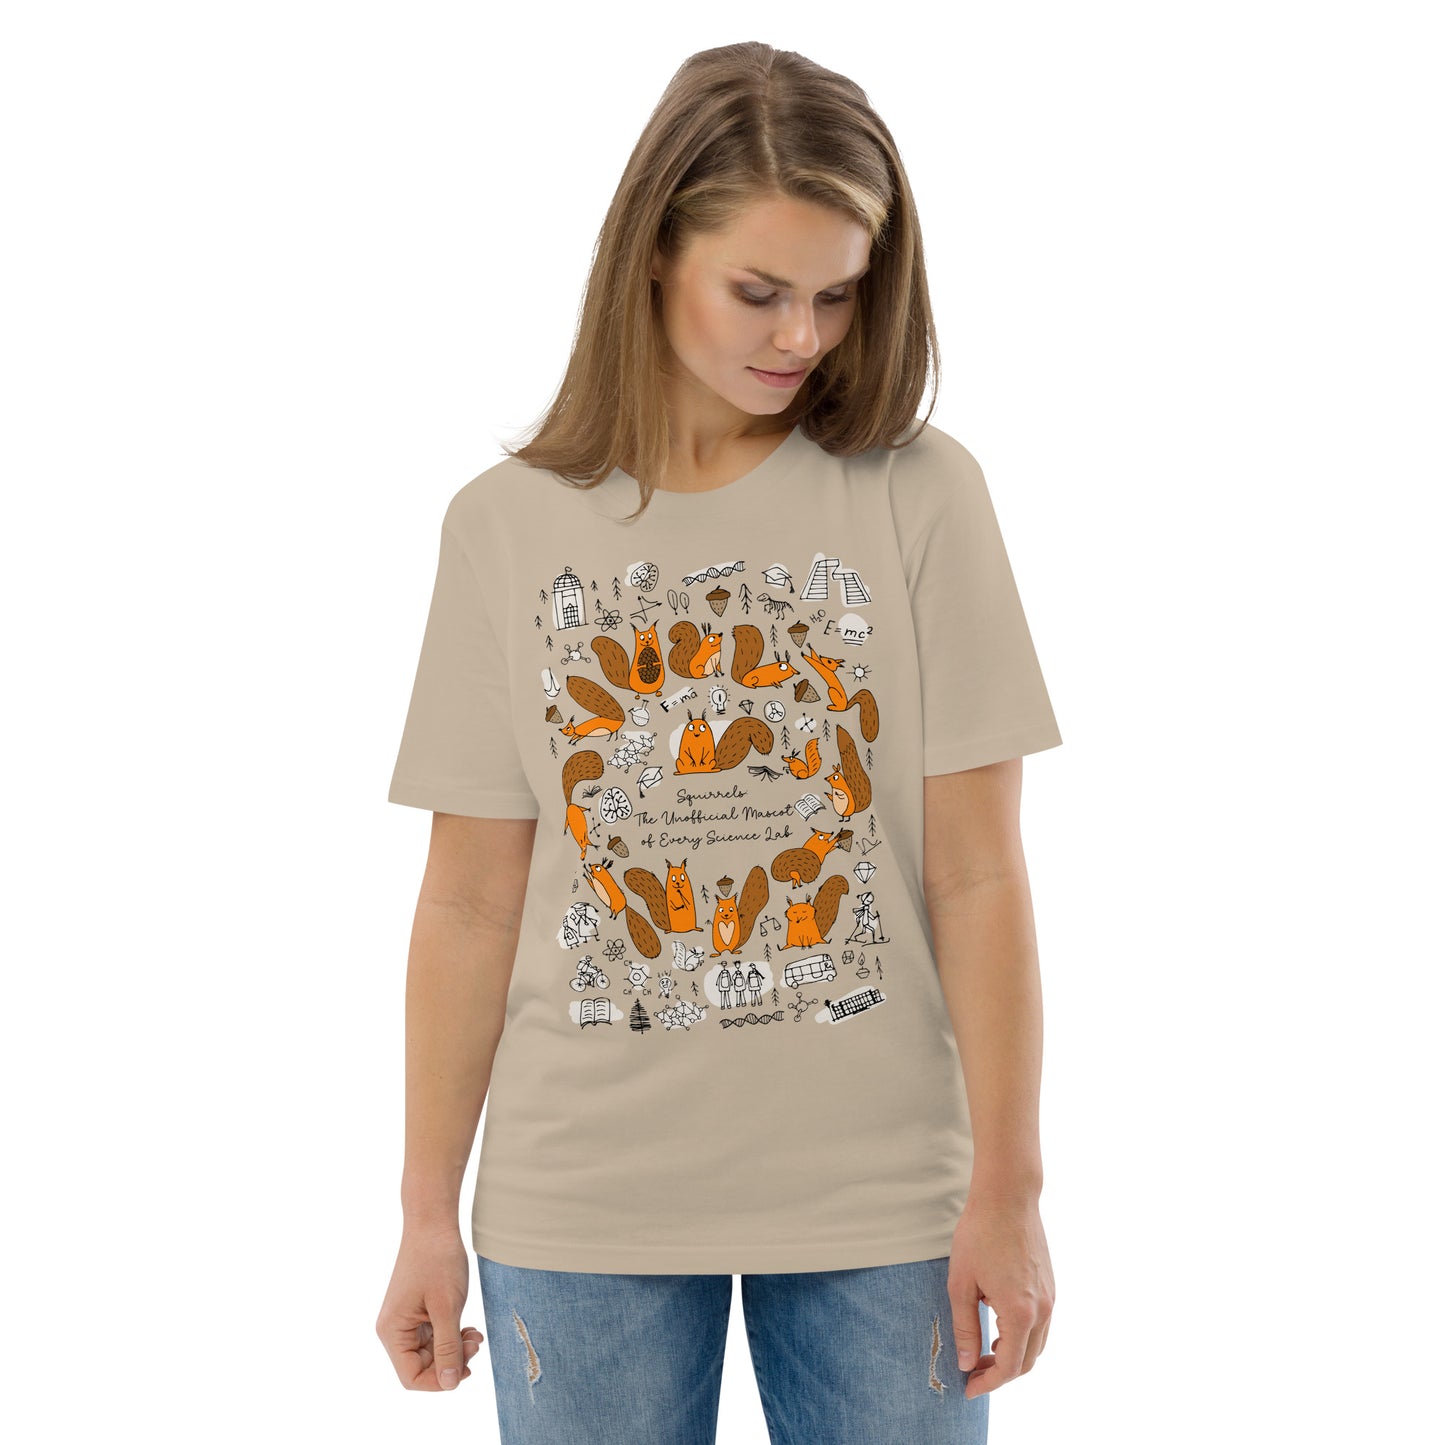 Woman in Unisex organic Cotton beige t-shirt with funny Squirrels and science design elements. Personalised t-shirt. Basic text on t-shirt "Squirrels the unofficial mascot of every lab"